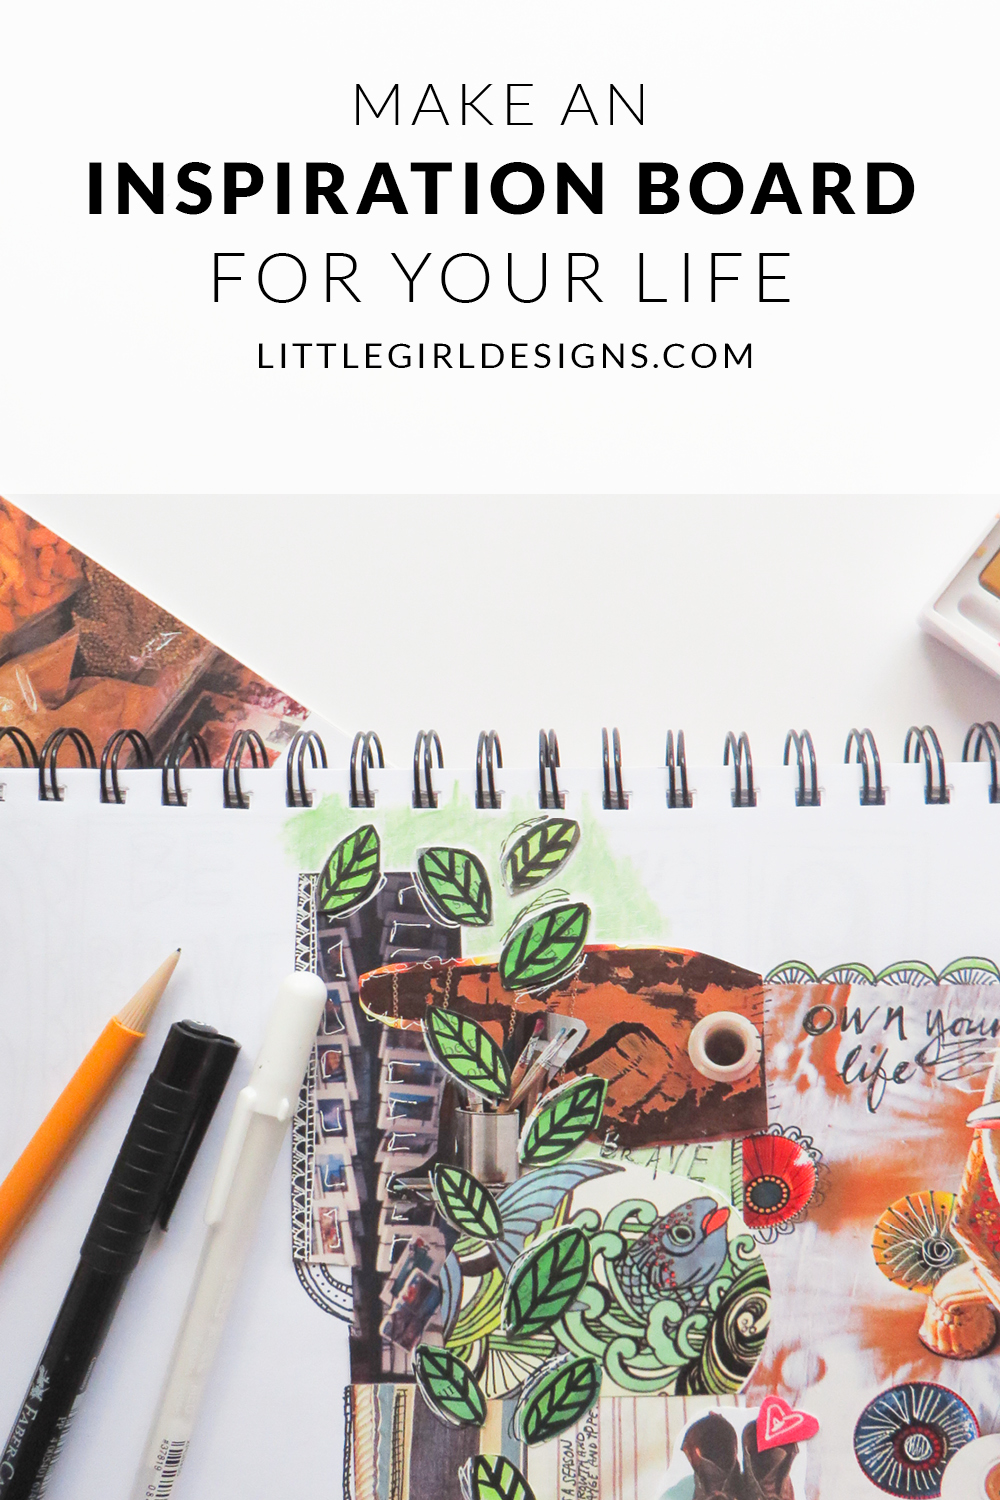 Want to learn how to create a vision board for your life? Get ideas for making inspiration boards for your dreams and goals in this post. I'll share examples of some of the inspiration boards I've made in the past; they're super easy to make!